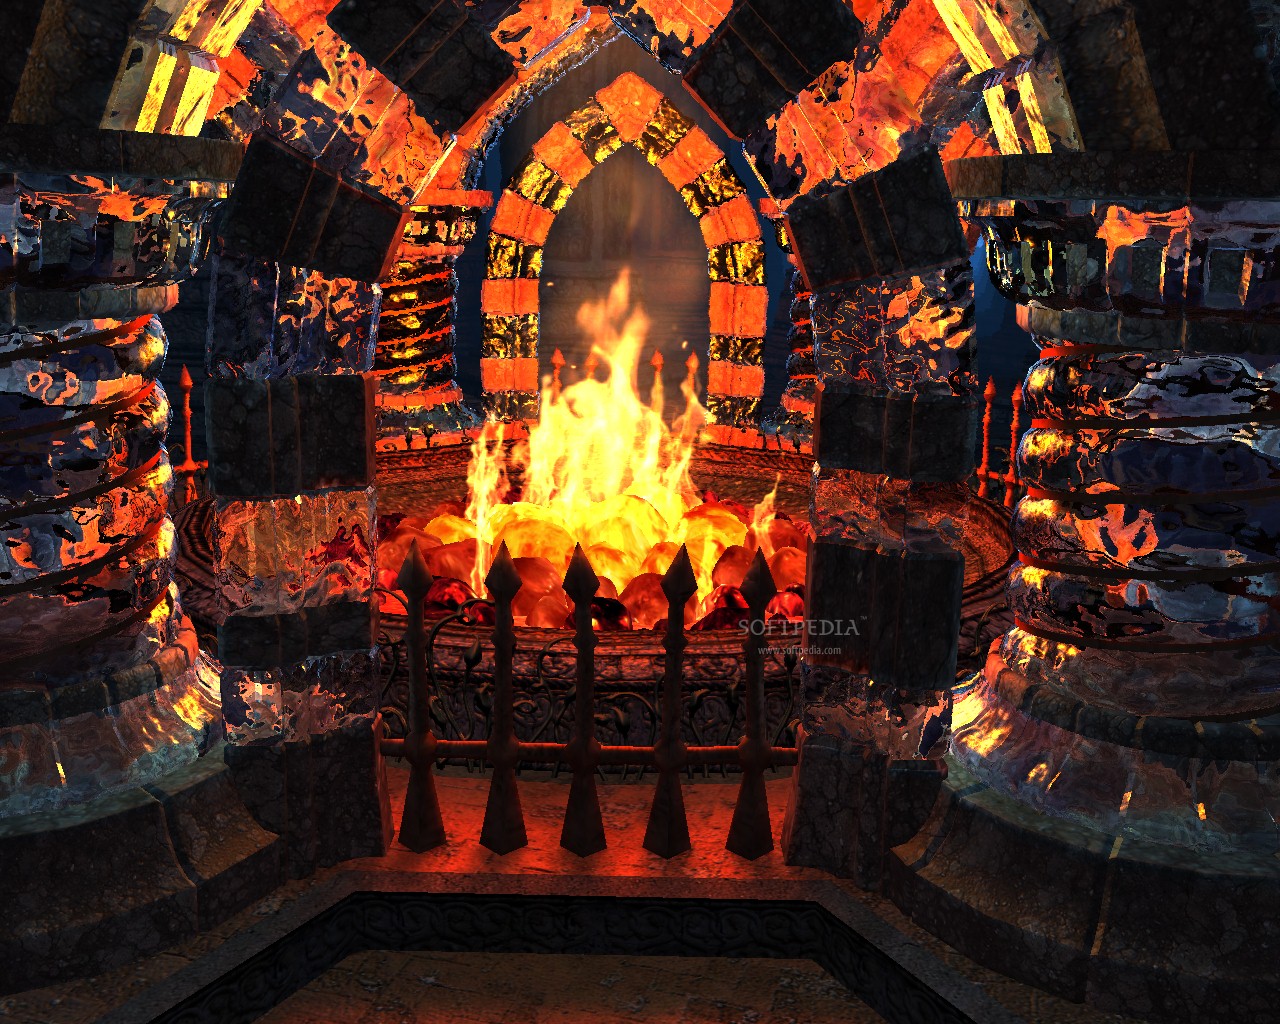 fireplace 3d screensaver free download